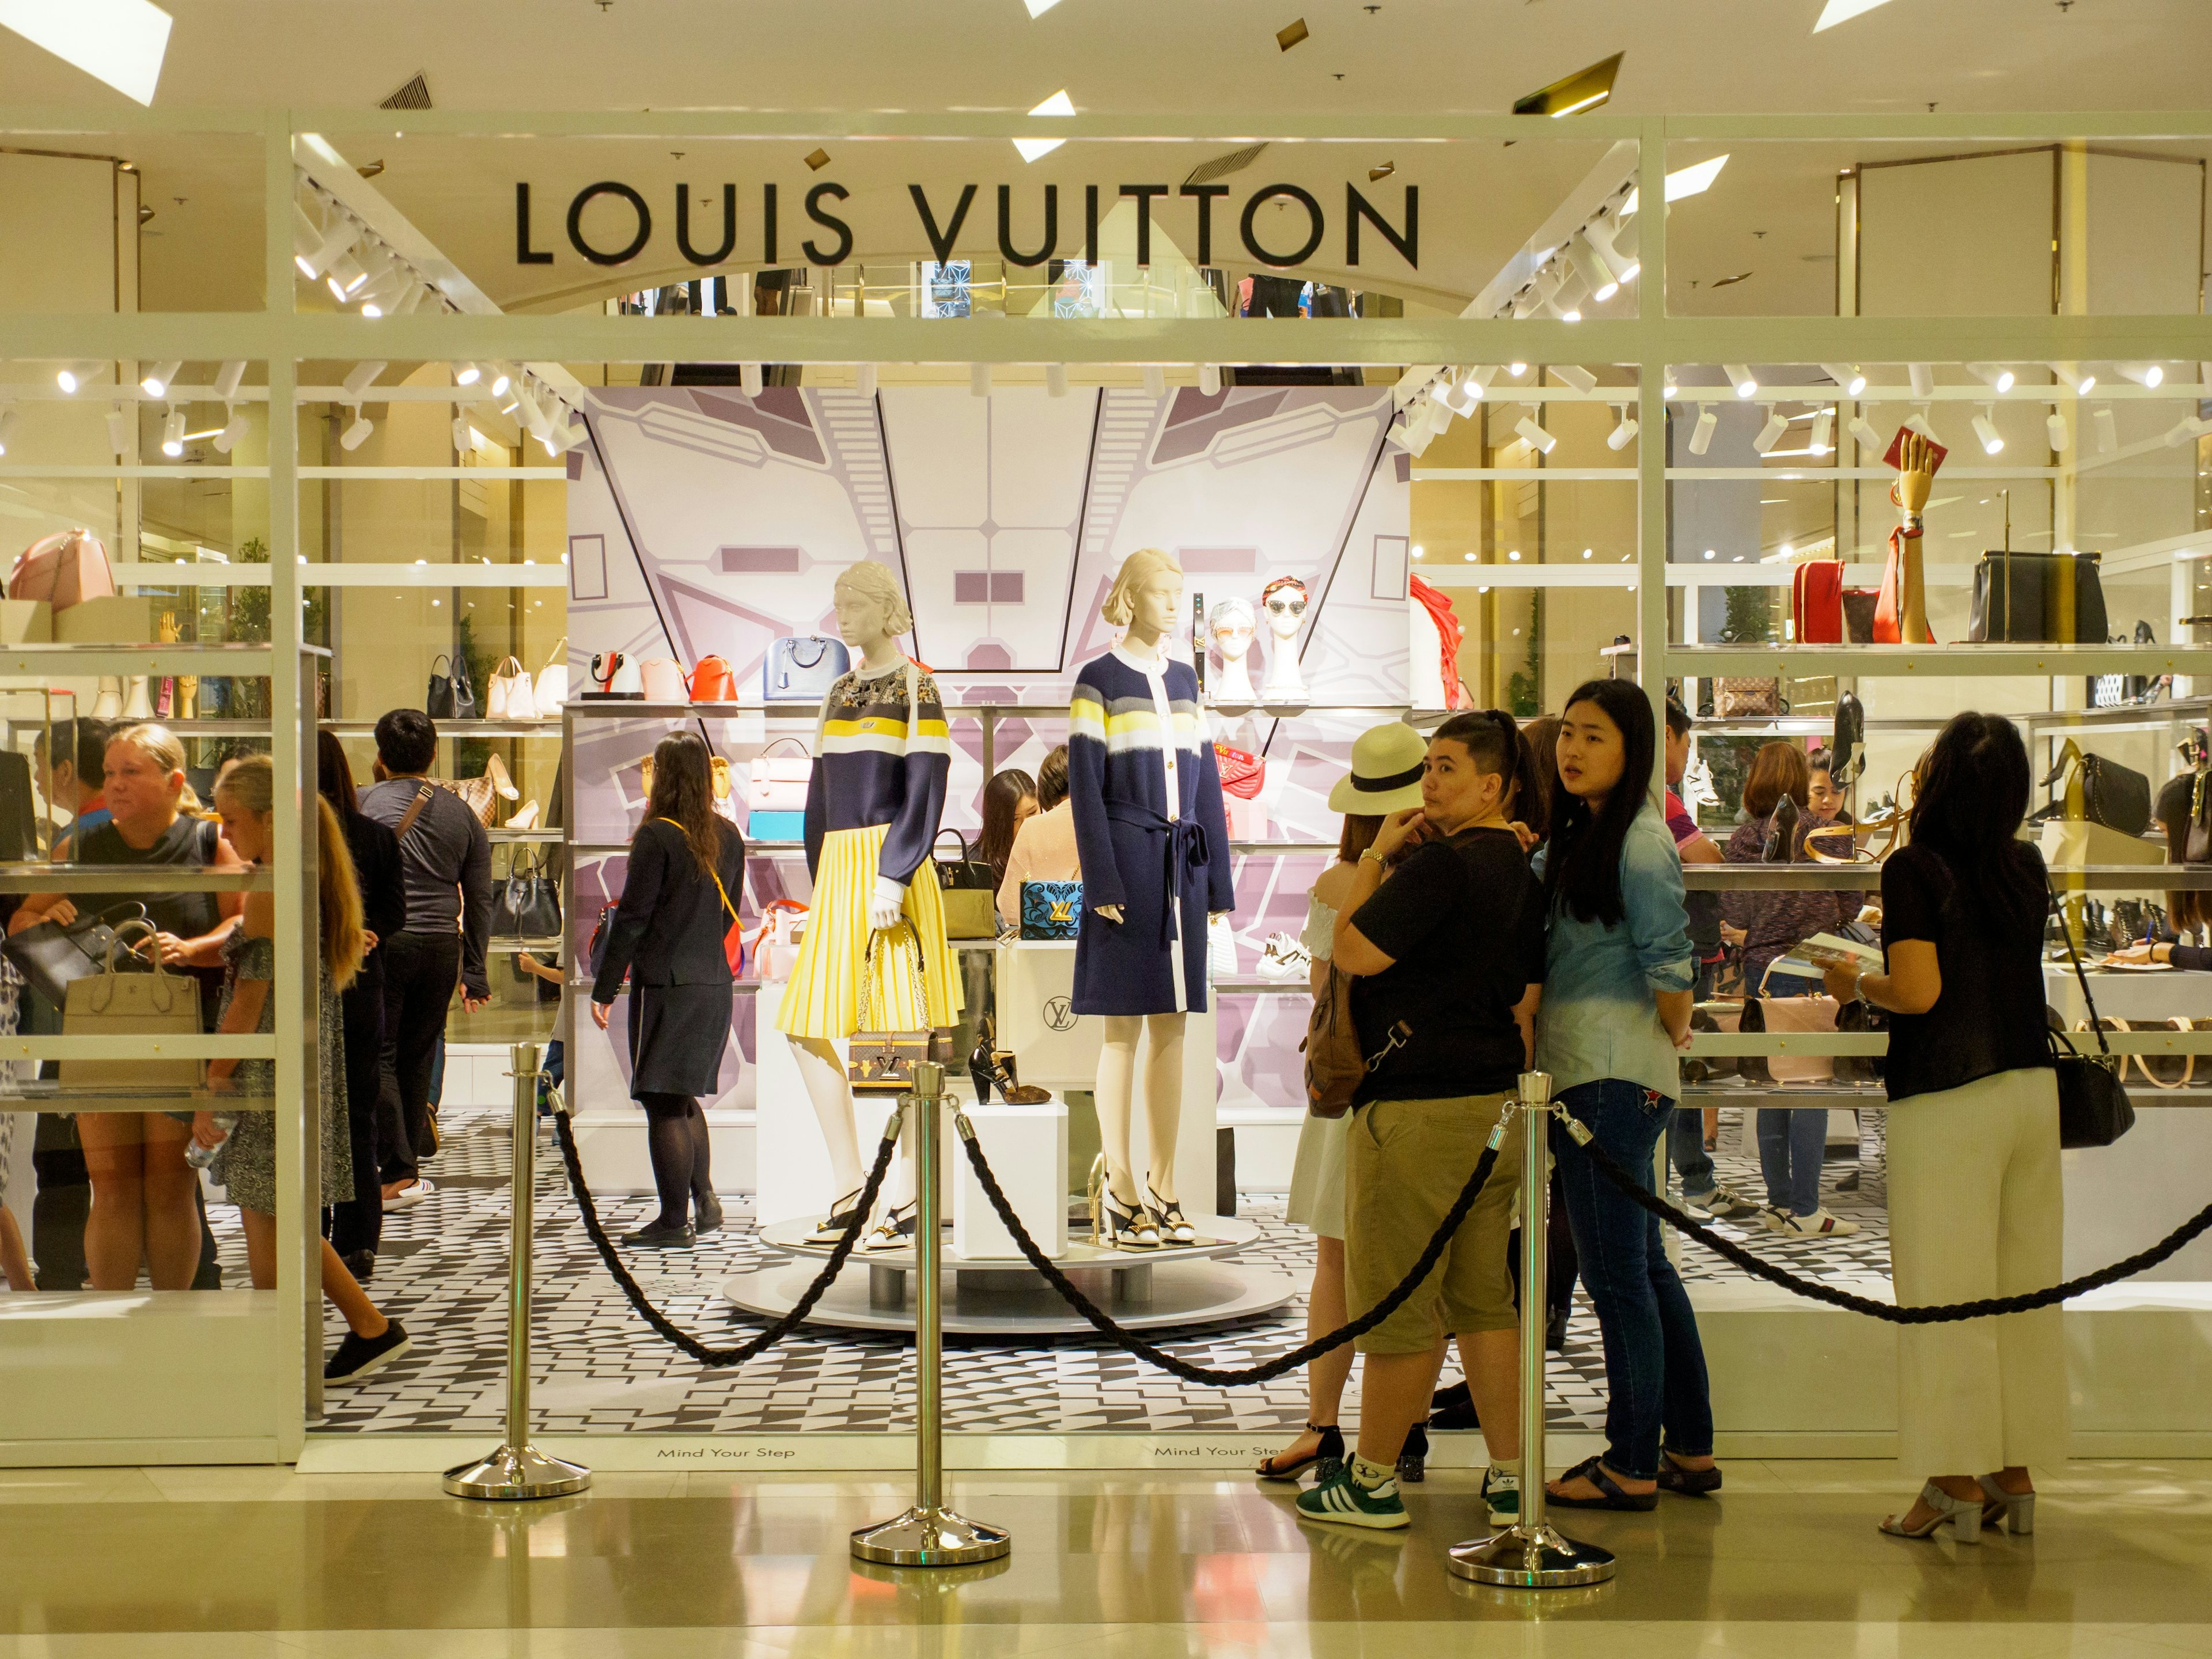 Chinese tourists queue up in front of a Louis Vuitton boutique at Siam Paragon department store in Bangkok, Thailand. Photo: Shutterstock